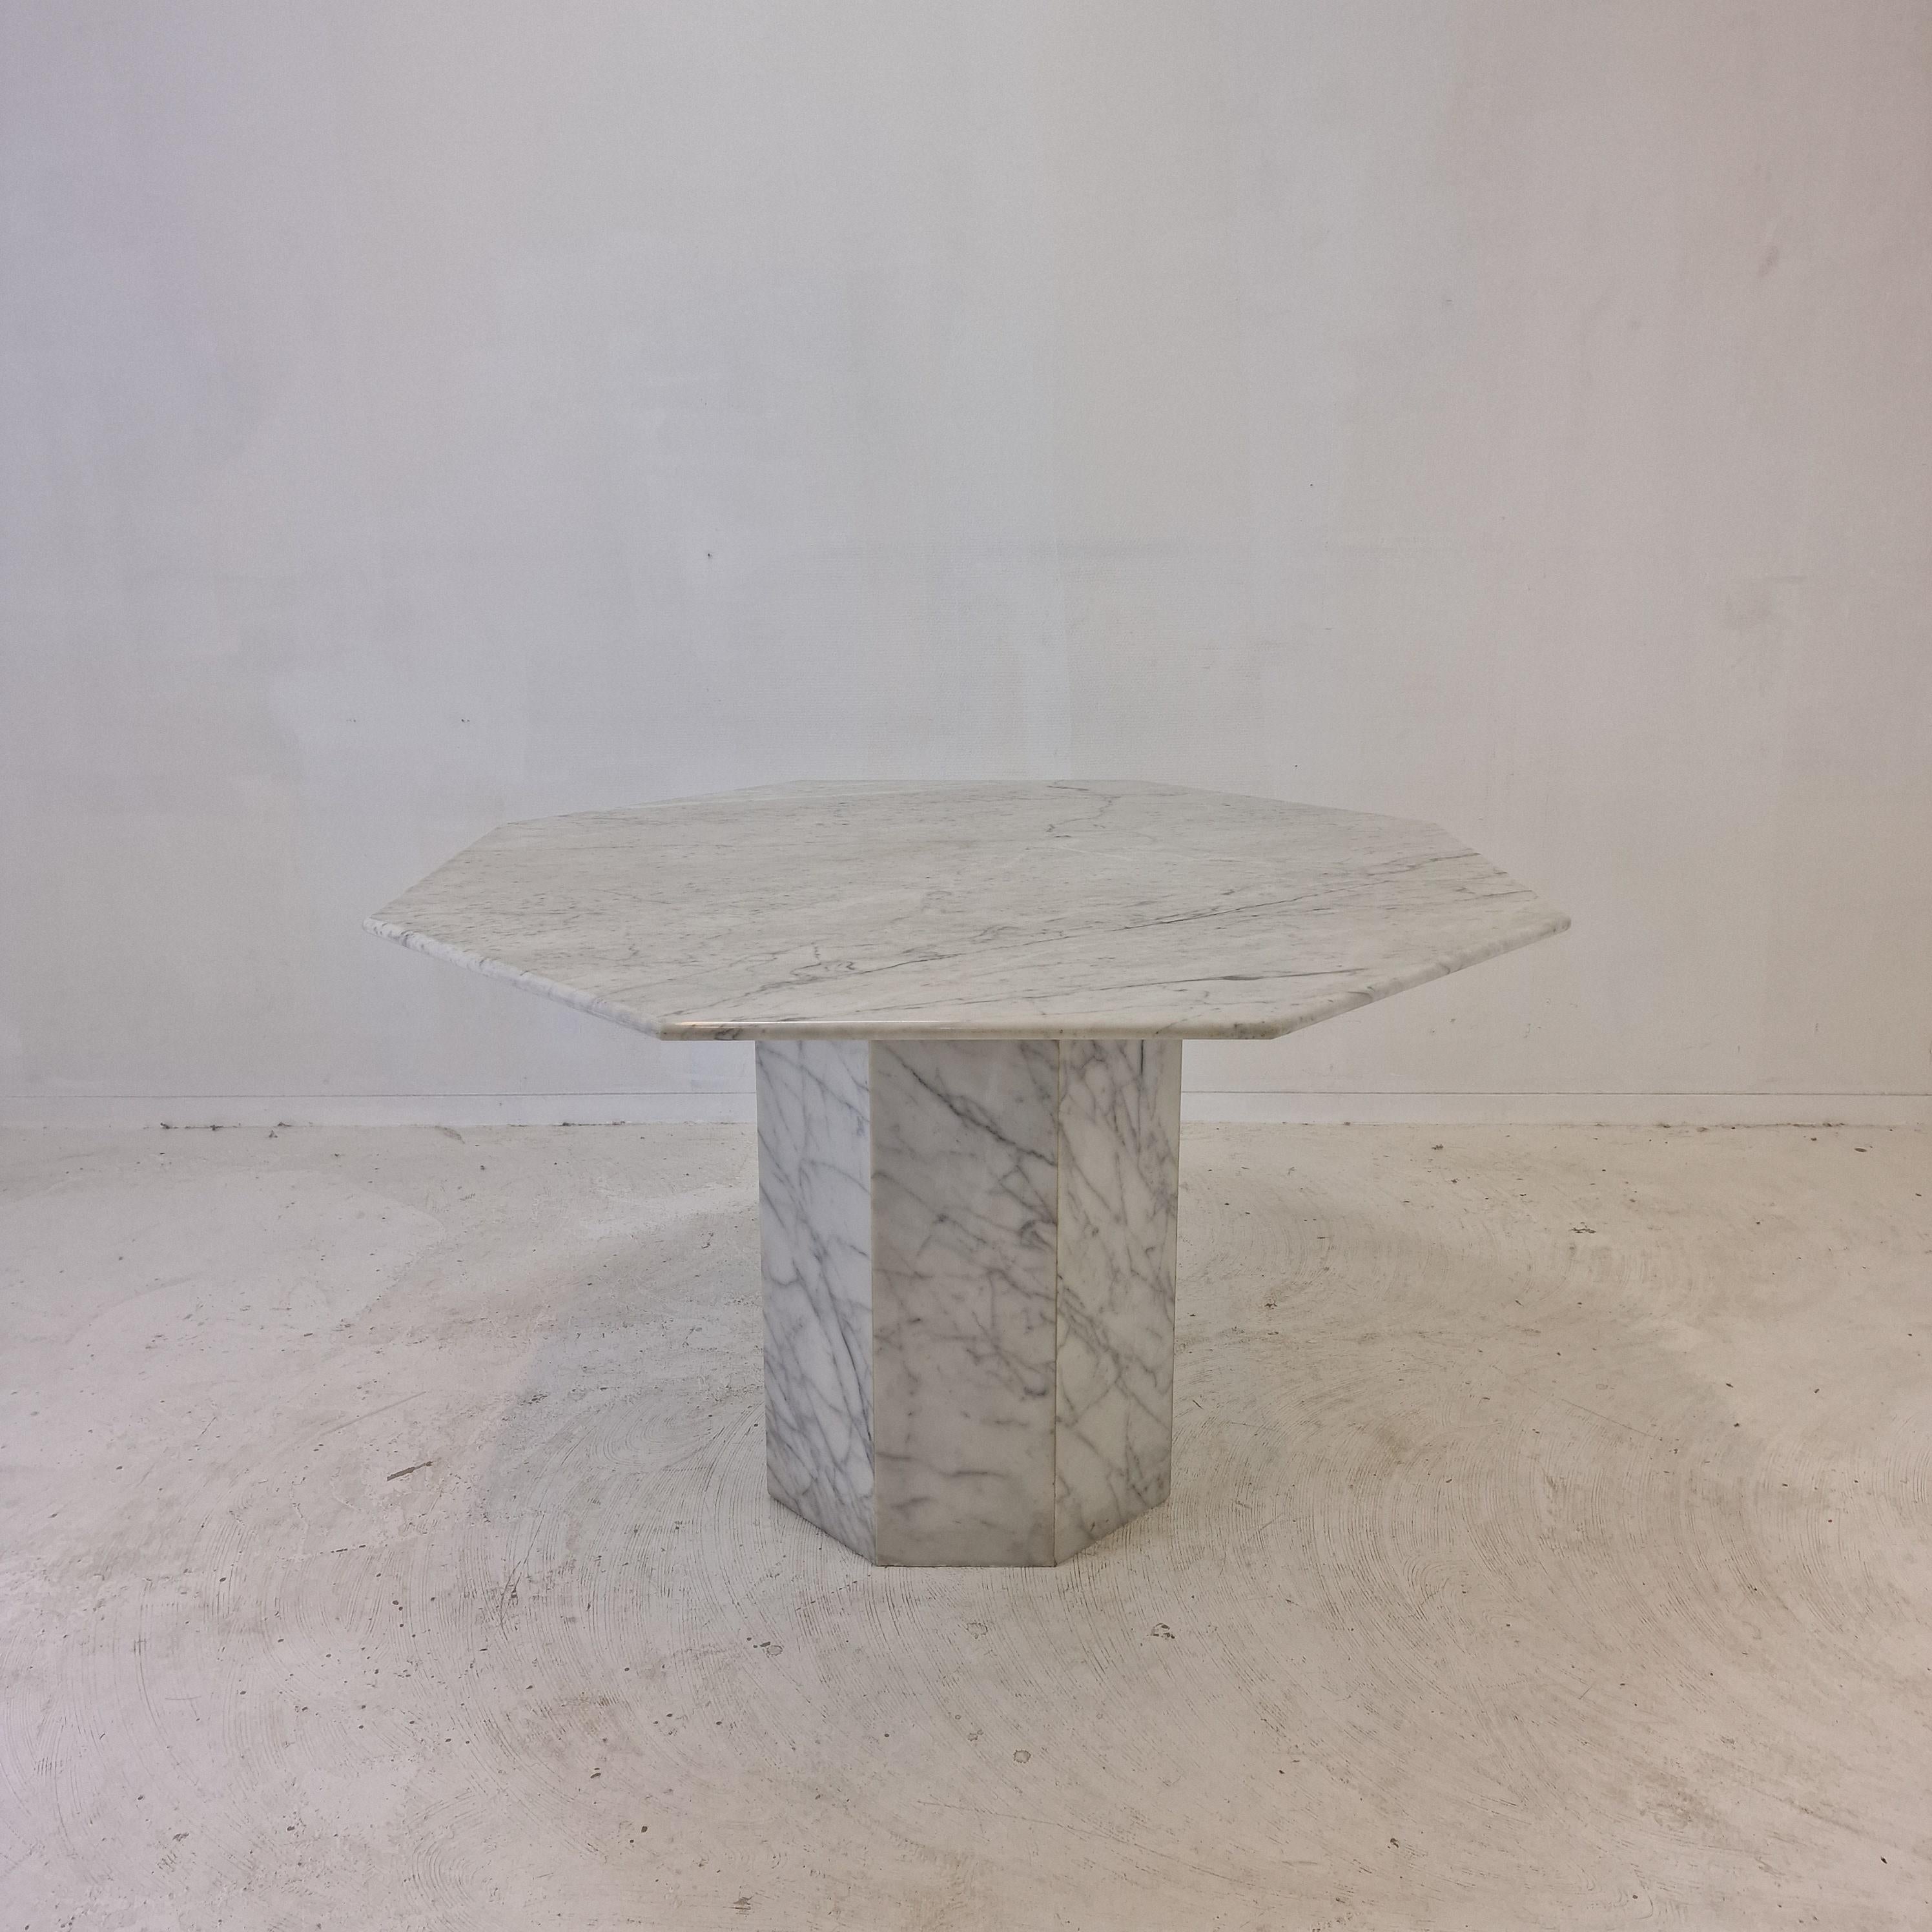 Beautiful Italian octagon dining table, it can also be used outside.
The table is made in the 1968.

It is handcrafted out of very nice Carrara marble. 
The fabulous marble features a very nice pattern of different colors. 

It has the normal traces